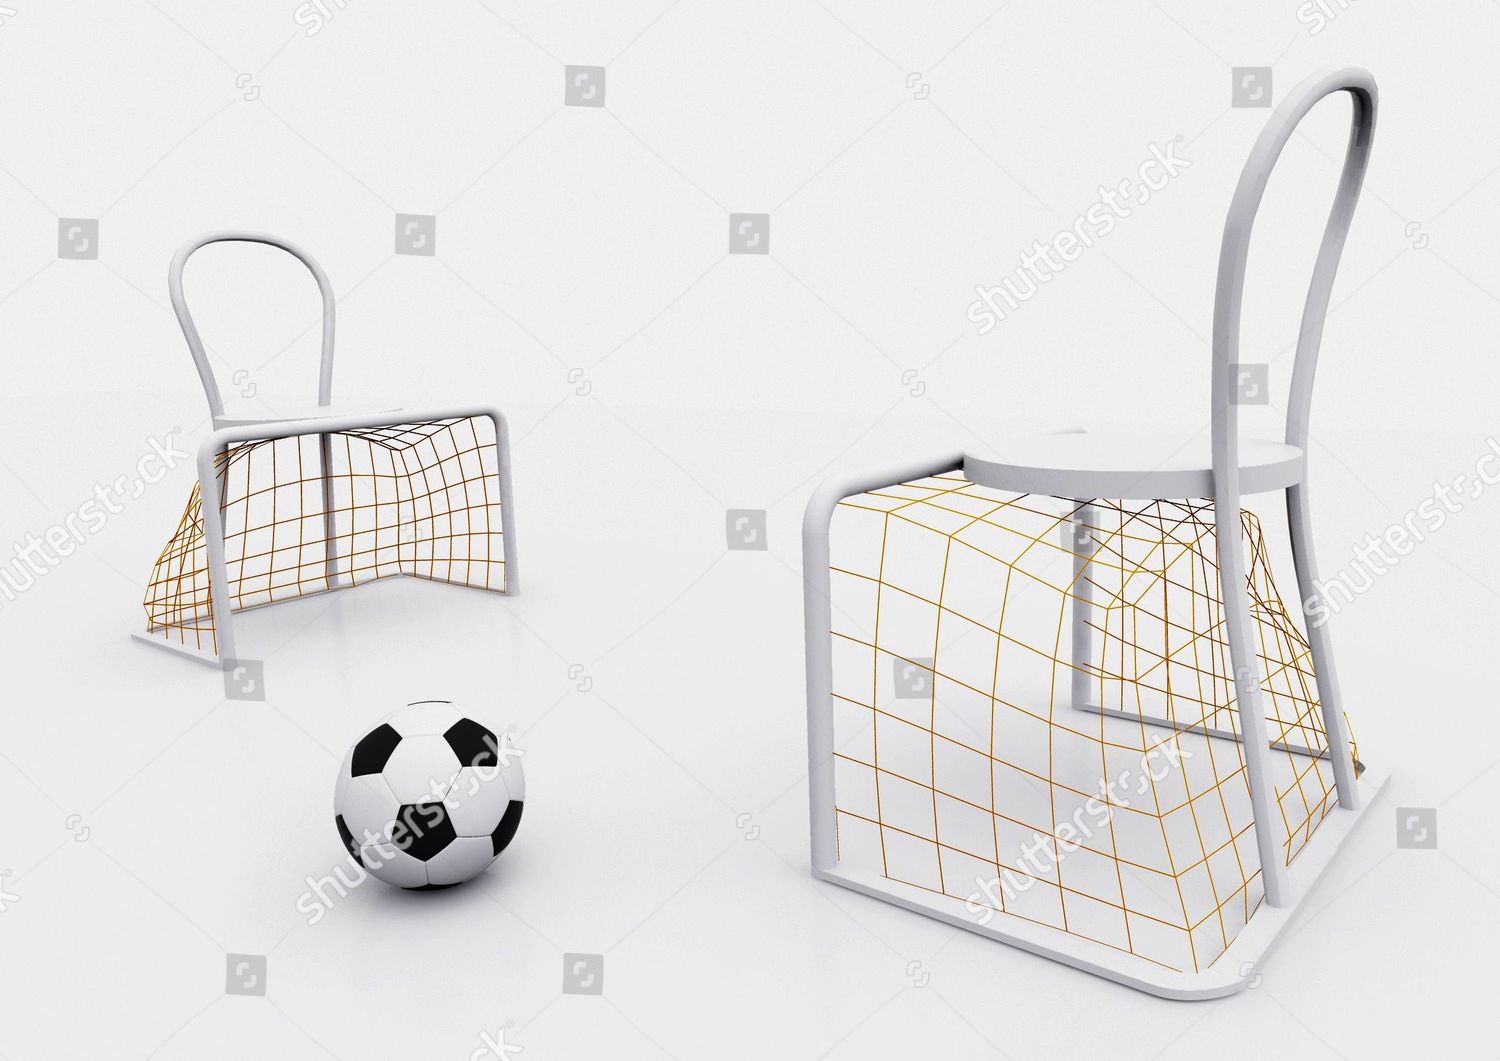 lazy football goal chairs editorial stock photo  stock